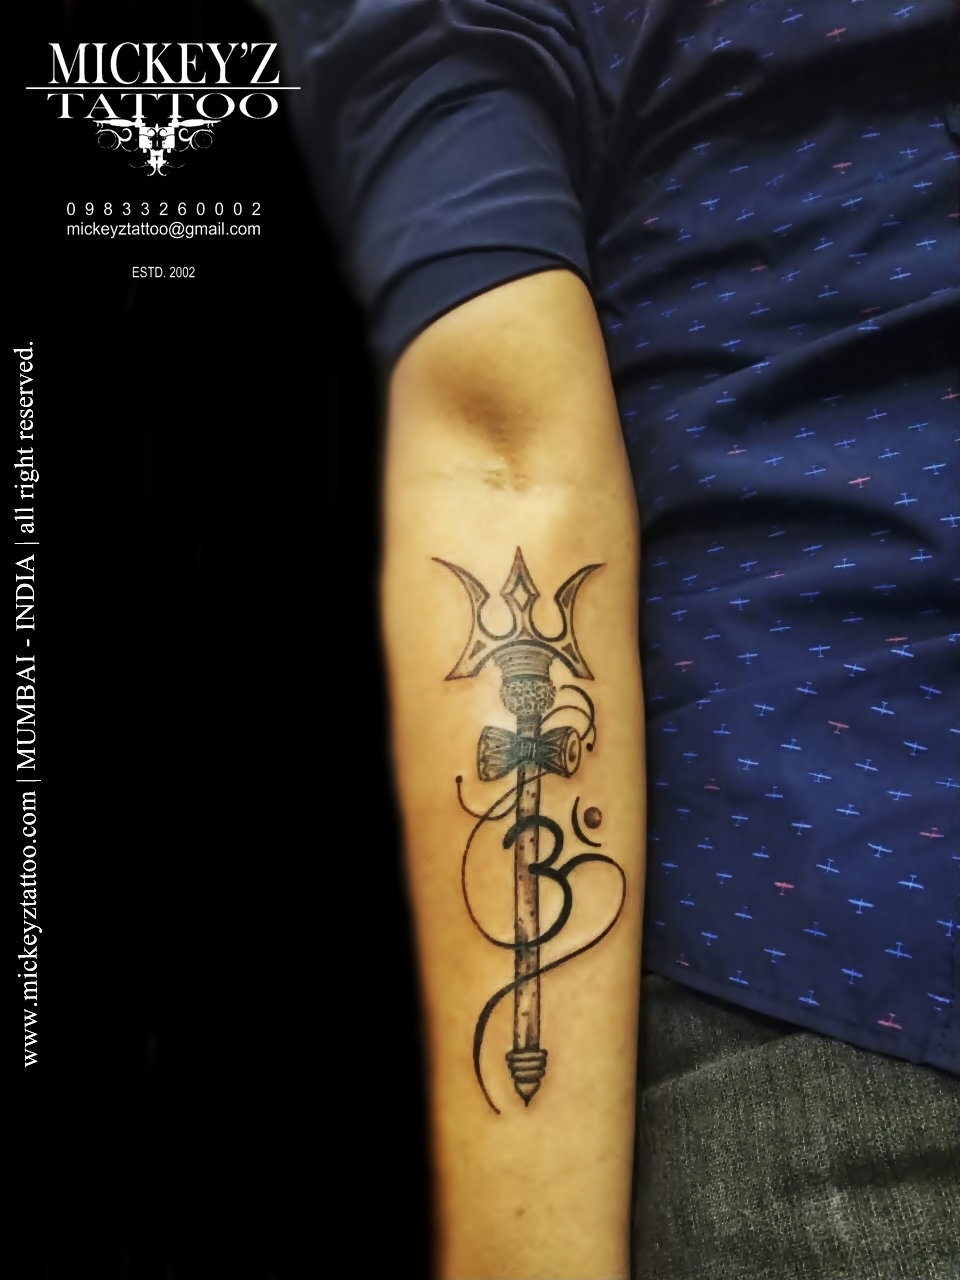 The Tattoo Studio with utmost Hygiene and precision, our tattoo artist  Delivers state of the art ,We Welcome All Tattoo styles from small to  large. #tattoo - The Tattoo Studio with utmost